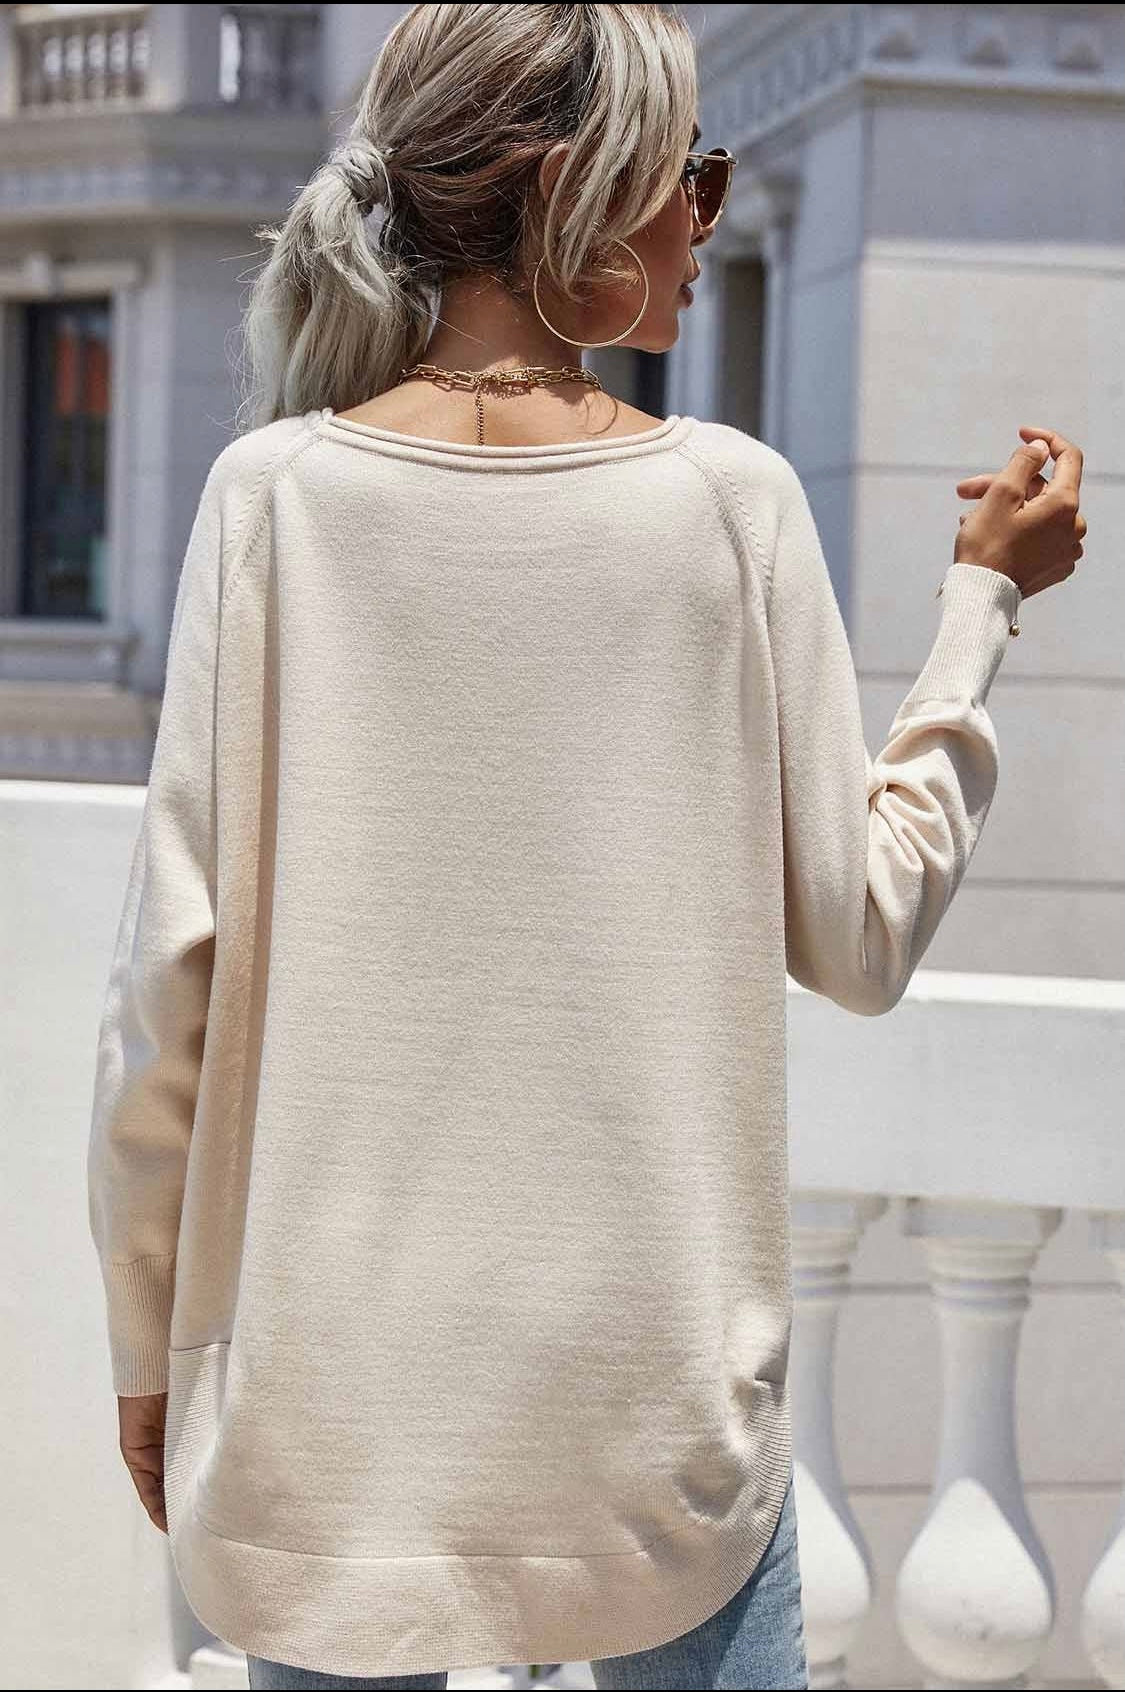 Loose Long sleeves, Rounded hem sweater